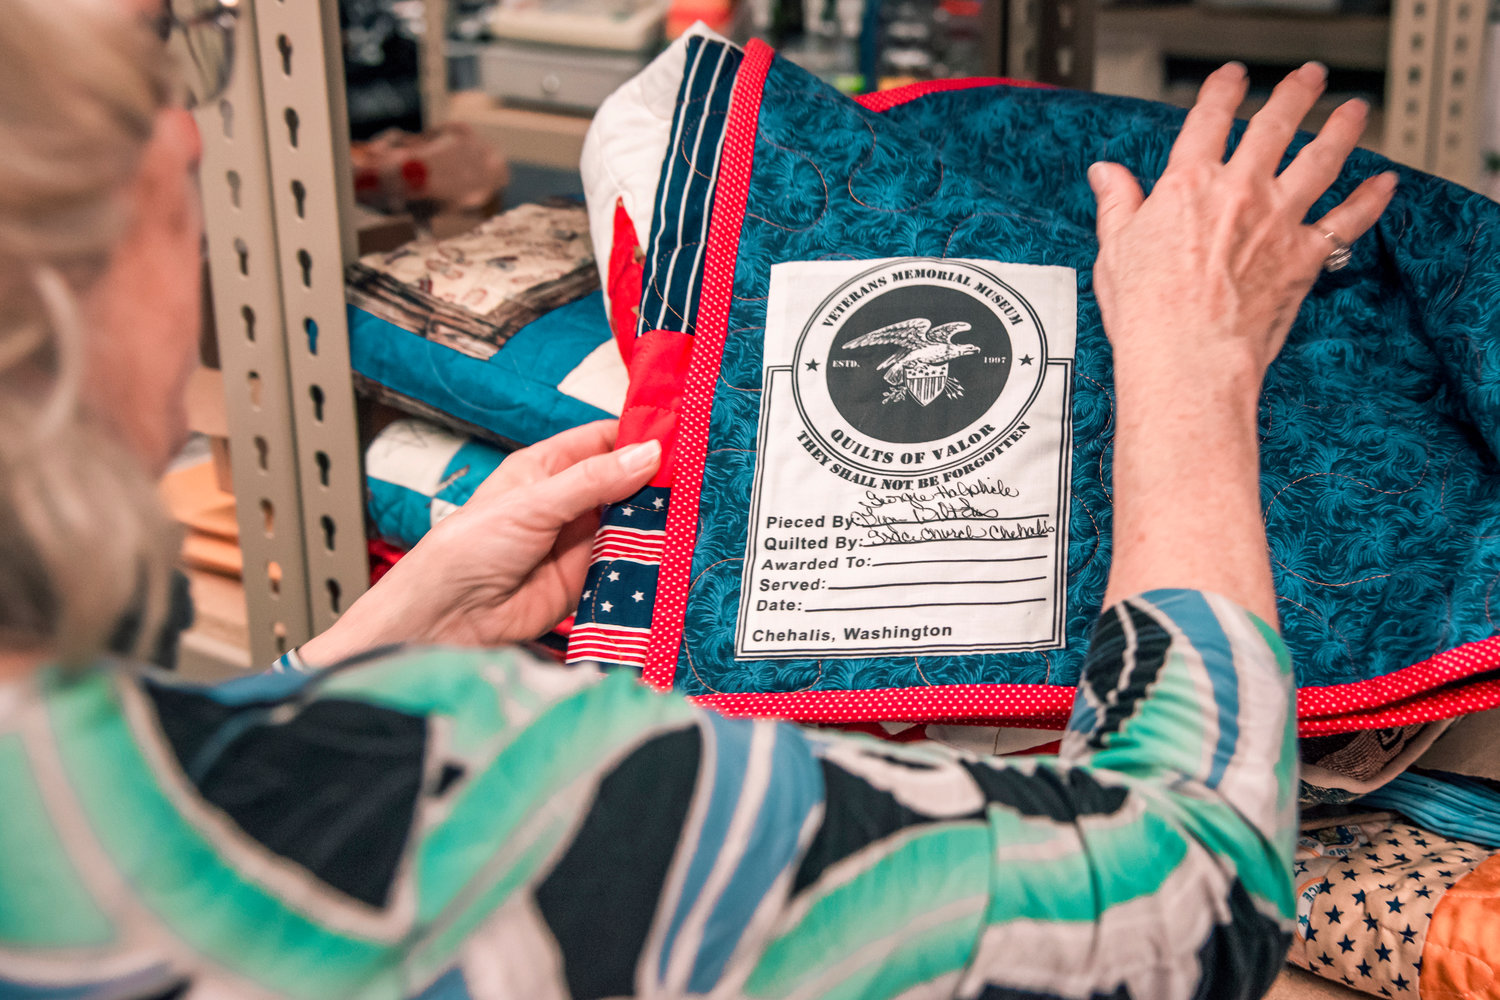 Debbie Aust talks about the label sewn onto every Quilts of Valor piece before being given to Veterans at the Veterans Memorial Museum in Chehalis.